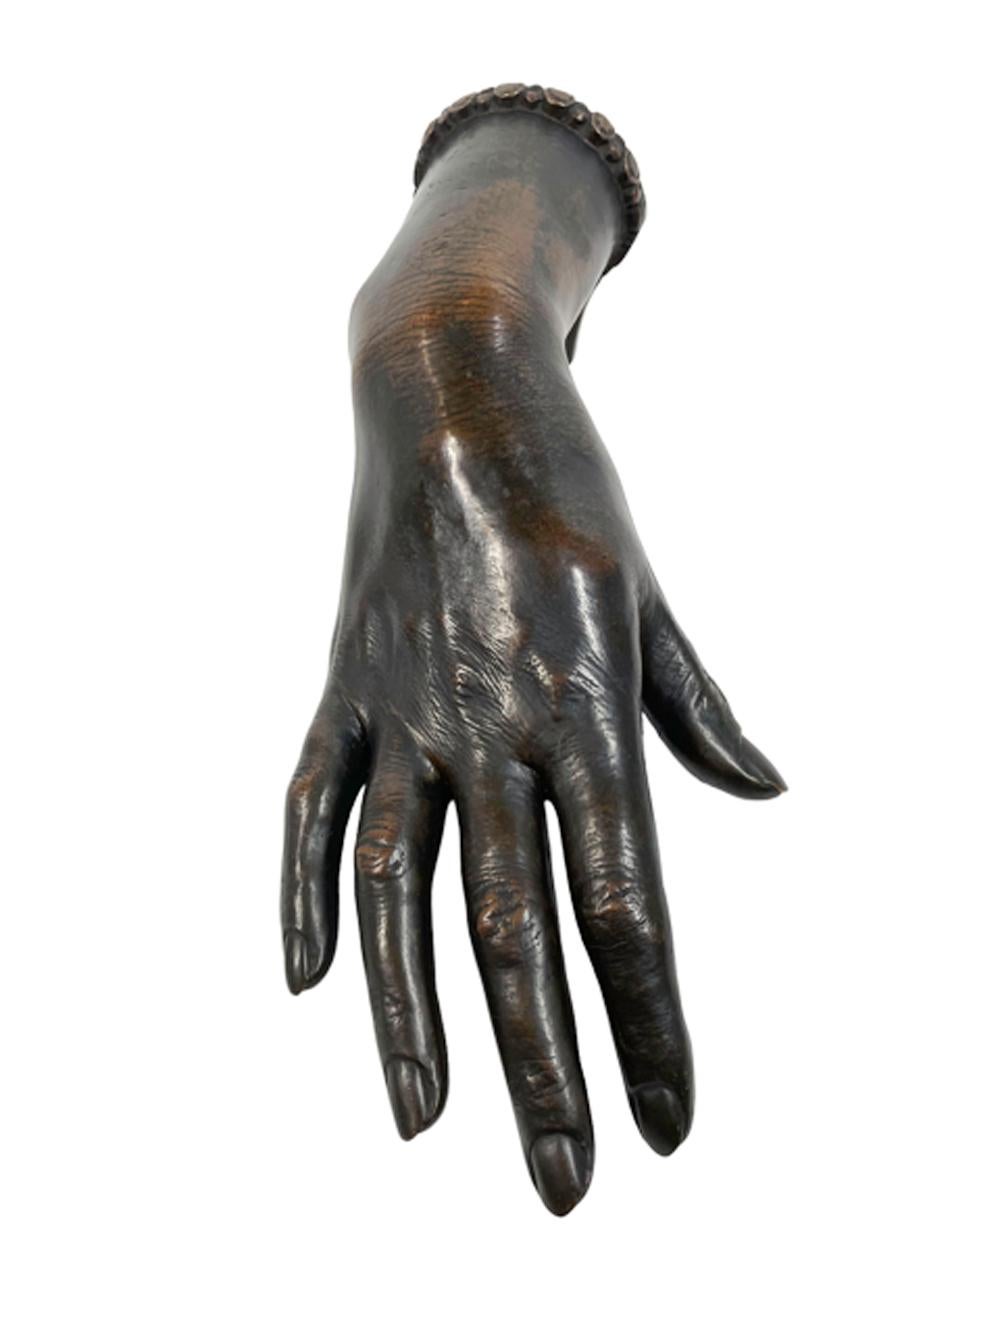 Life-size patinated cast bronze study of a ladies hand with a bracelet on her arched wrist which is raised on a support dated 1926.